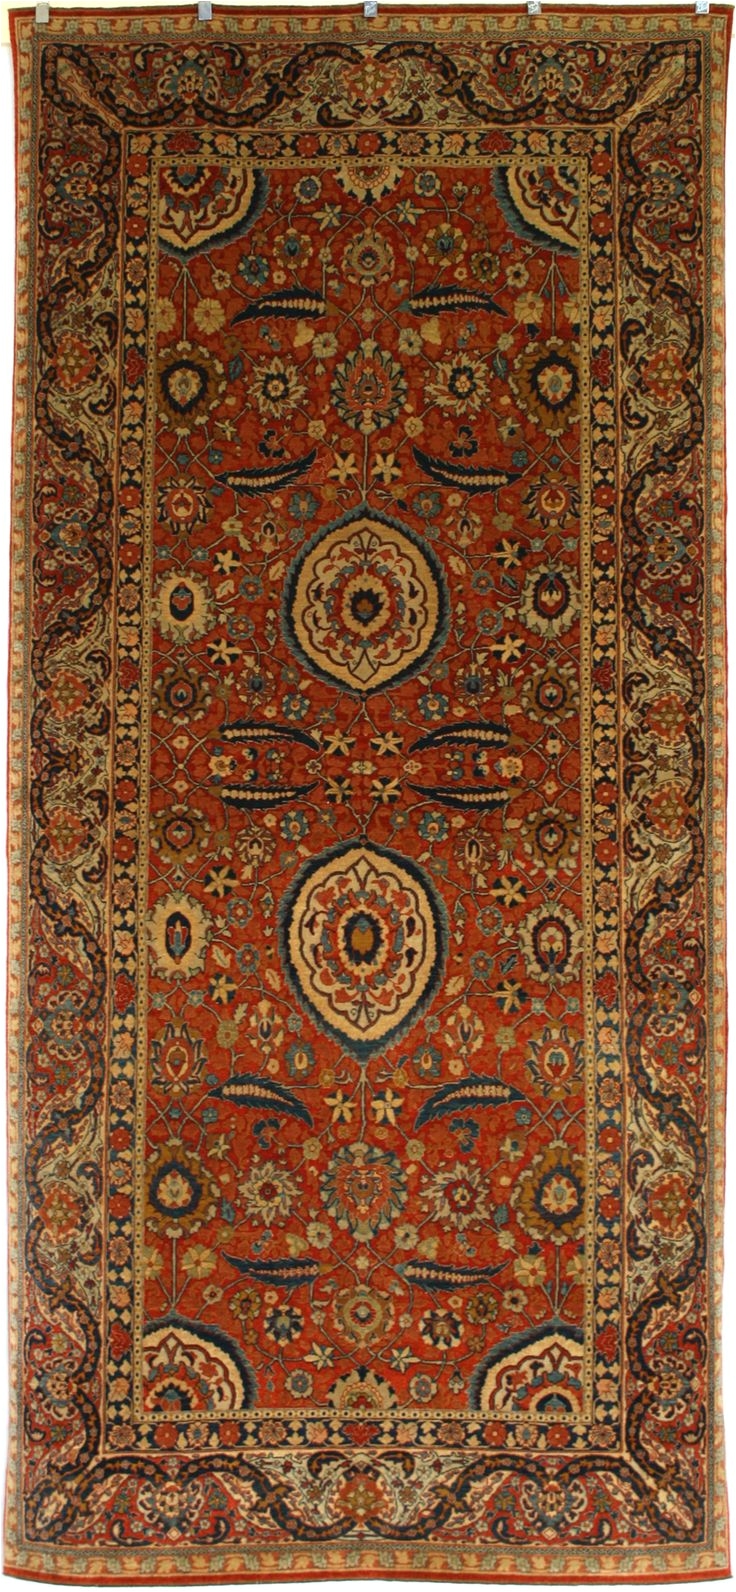 Most Expensive Rugs 60 Best Persian Rugs Images On Pinterest oriental Rugs Persian